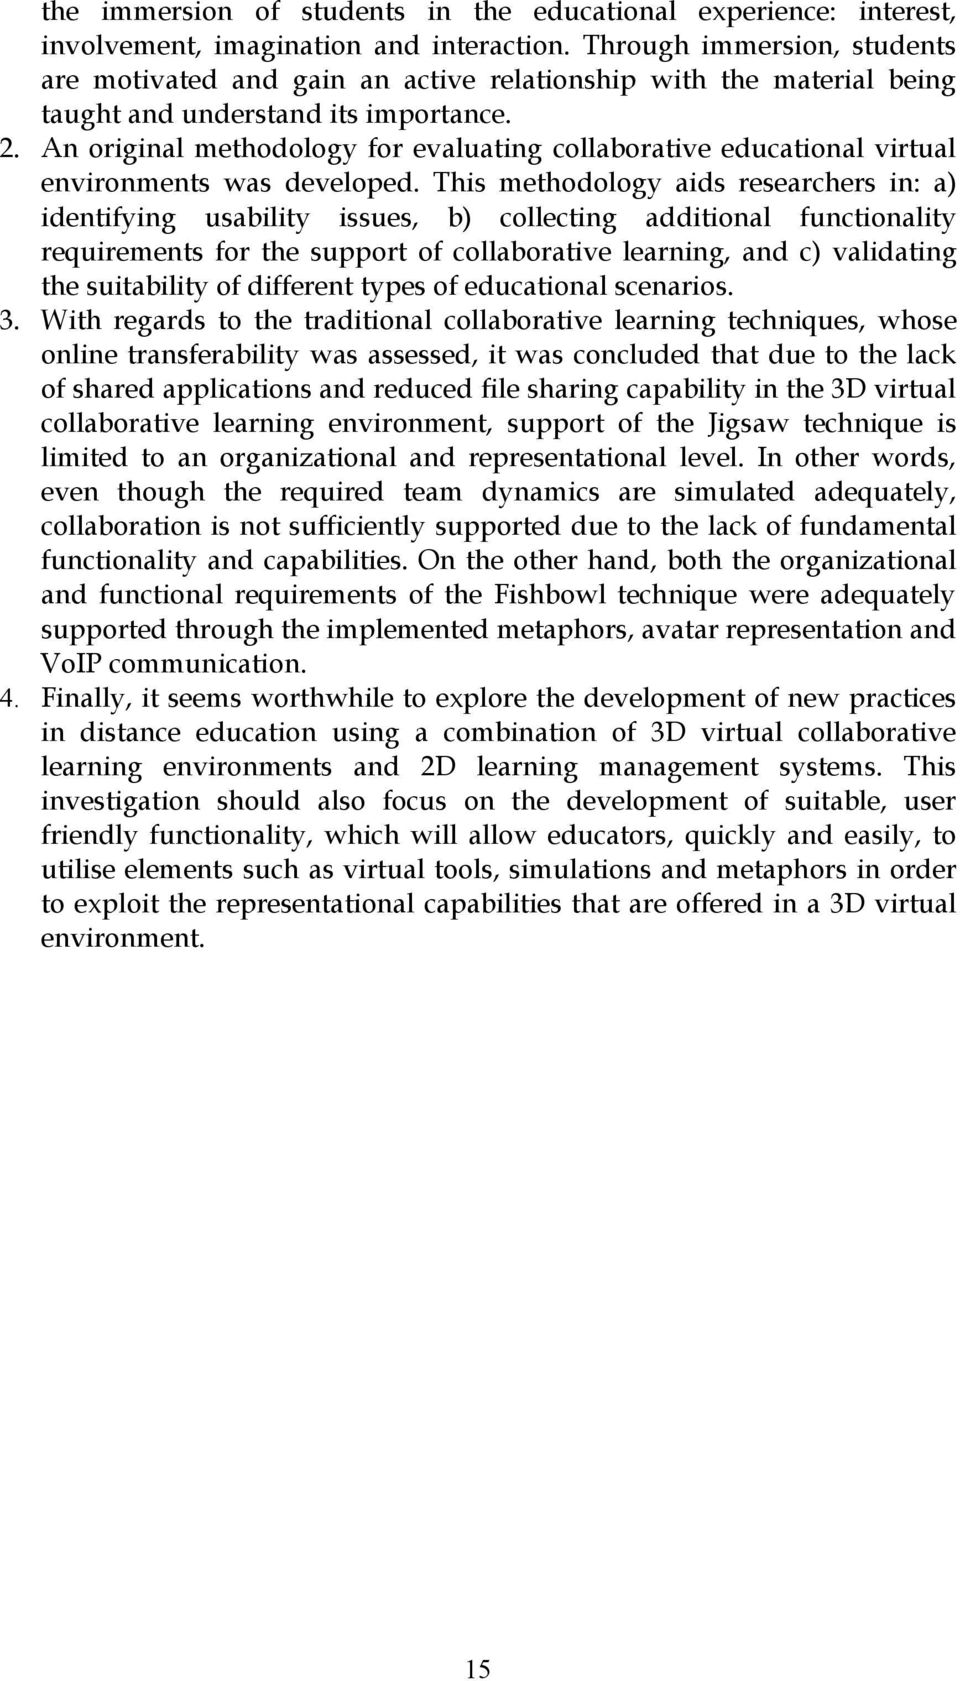 An original methodology for evaluating collaborative educational virtual environments was developed.